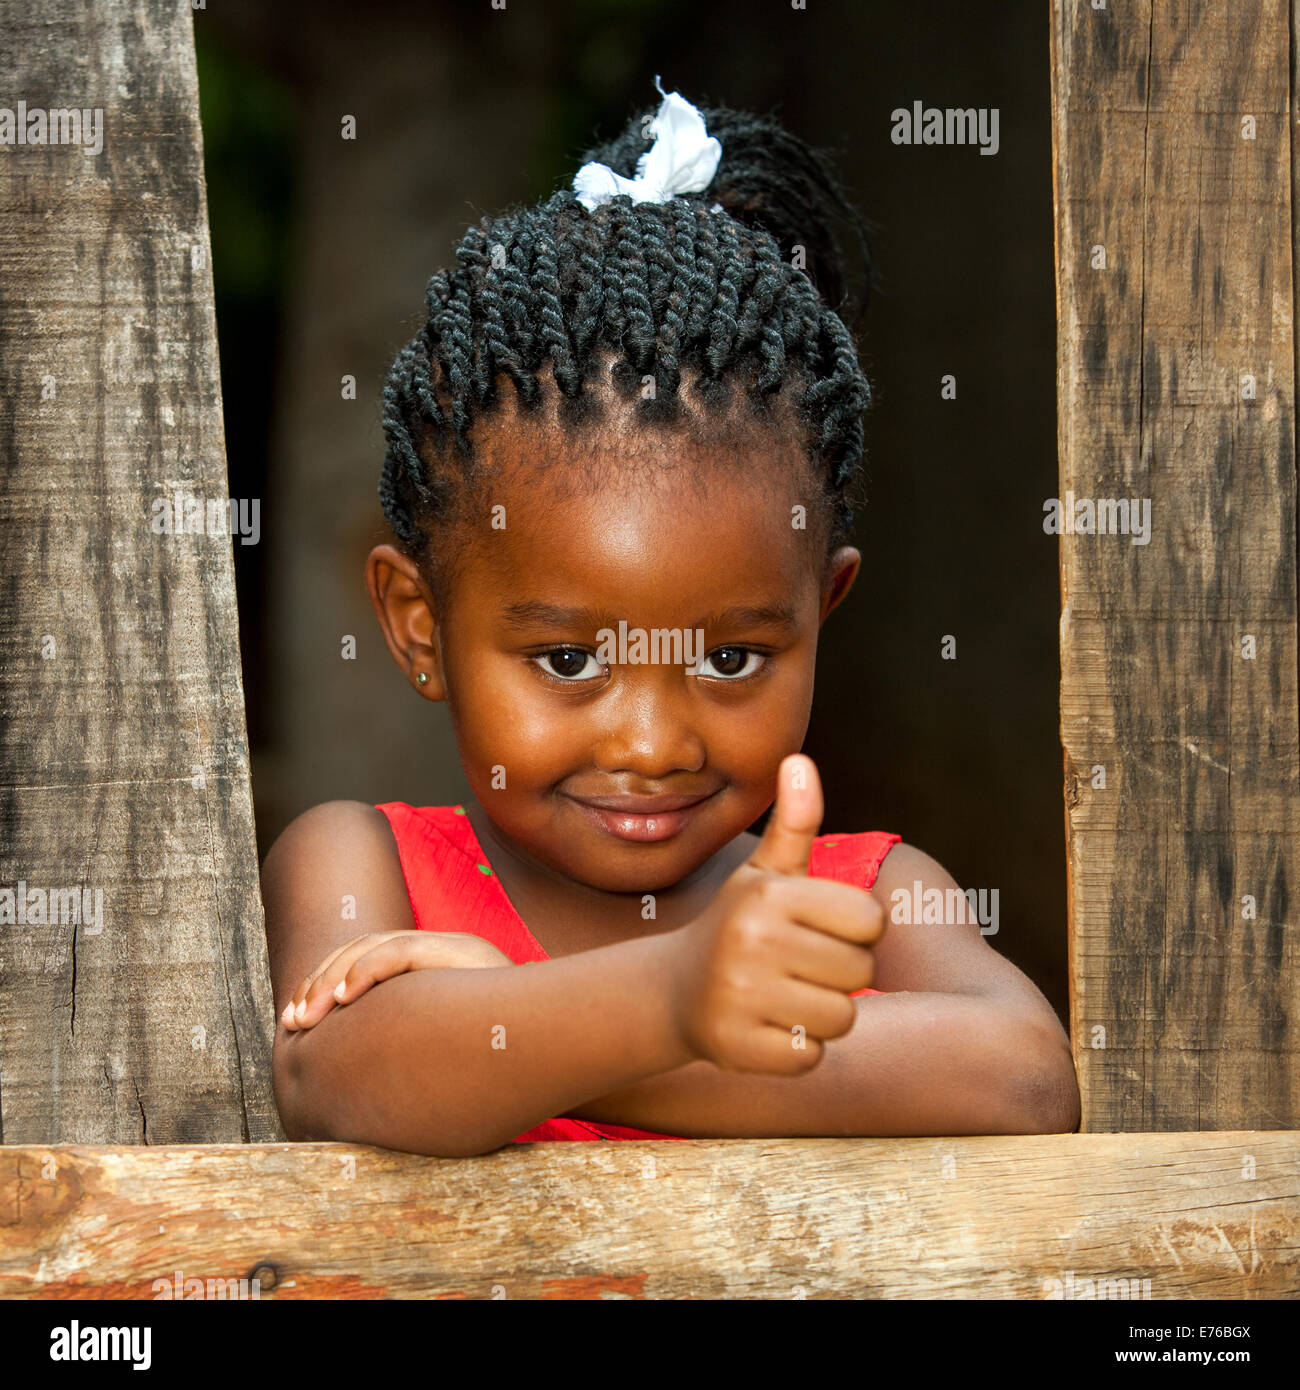 Portrait of small African girl doing thumbs up at wooden fence. Stock Photo